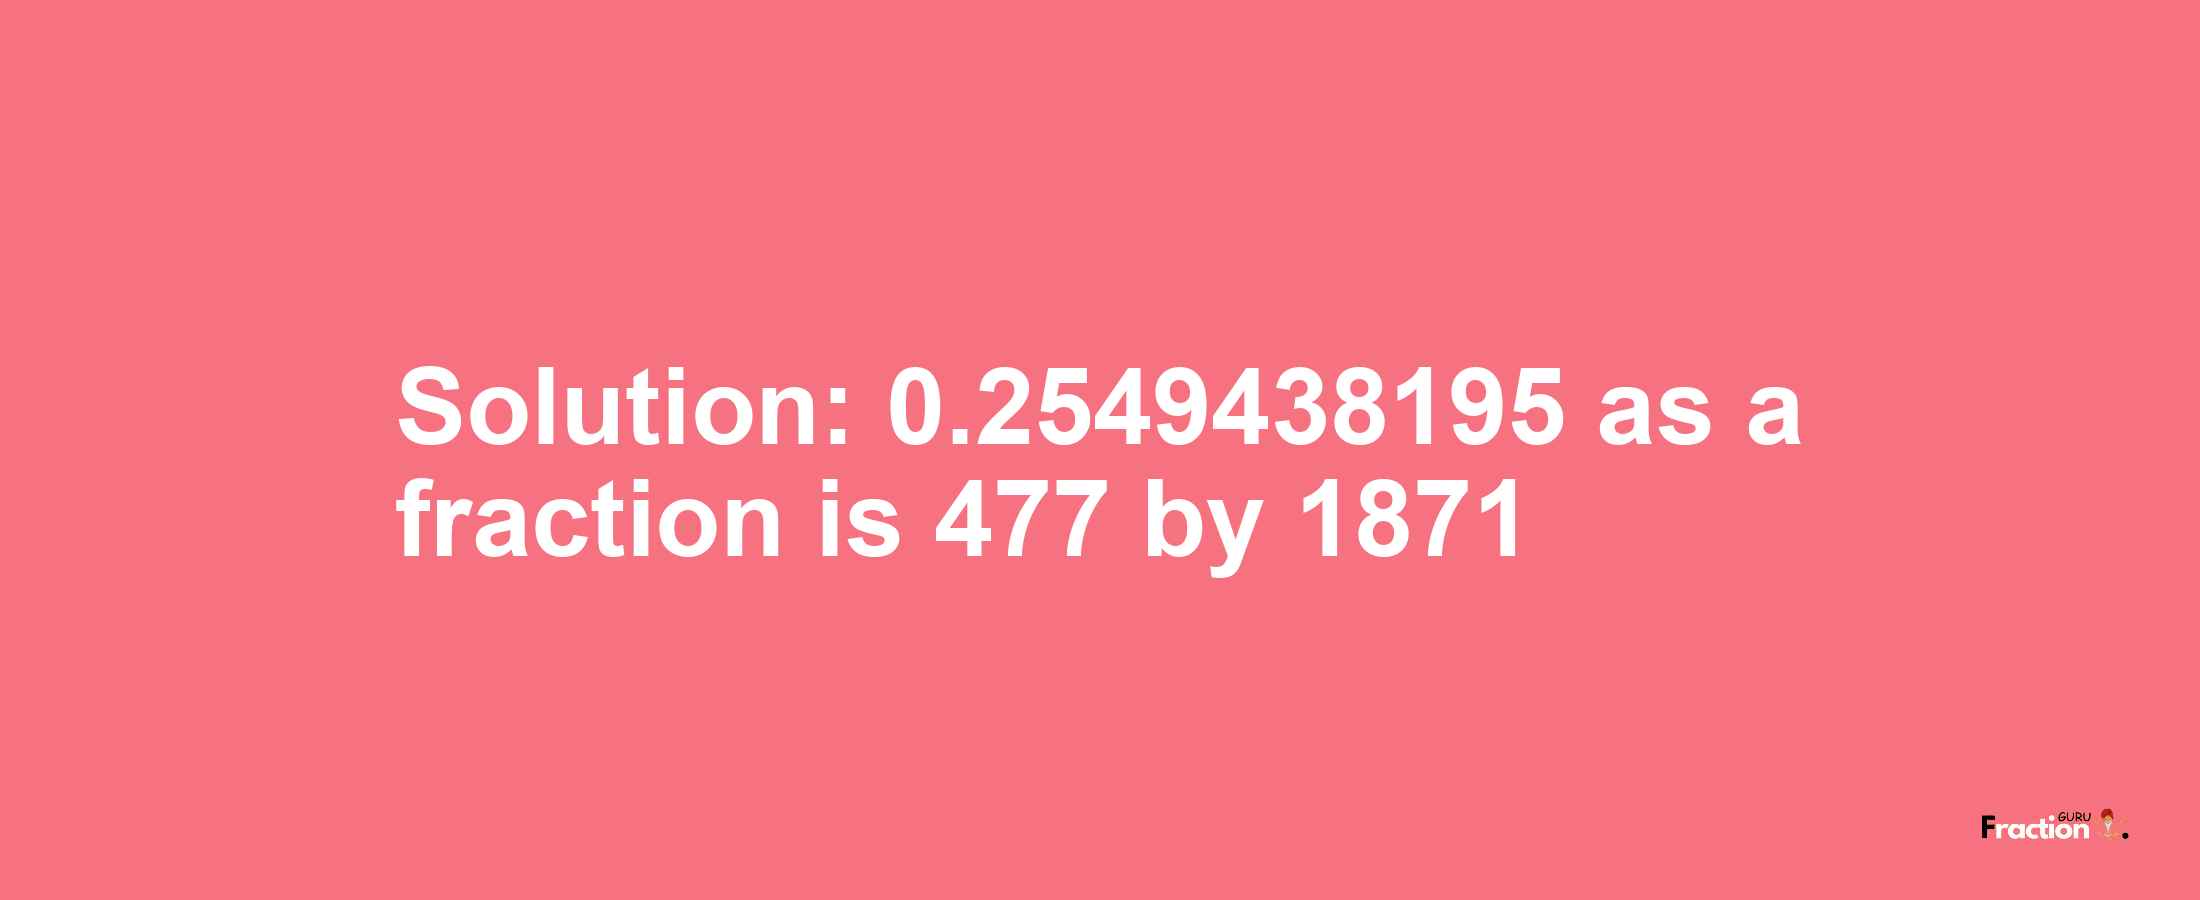 Solution:0.2549438195 as a fraction is 477/1871